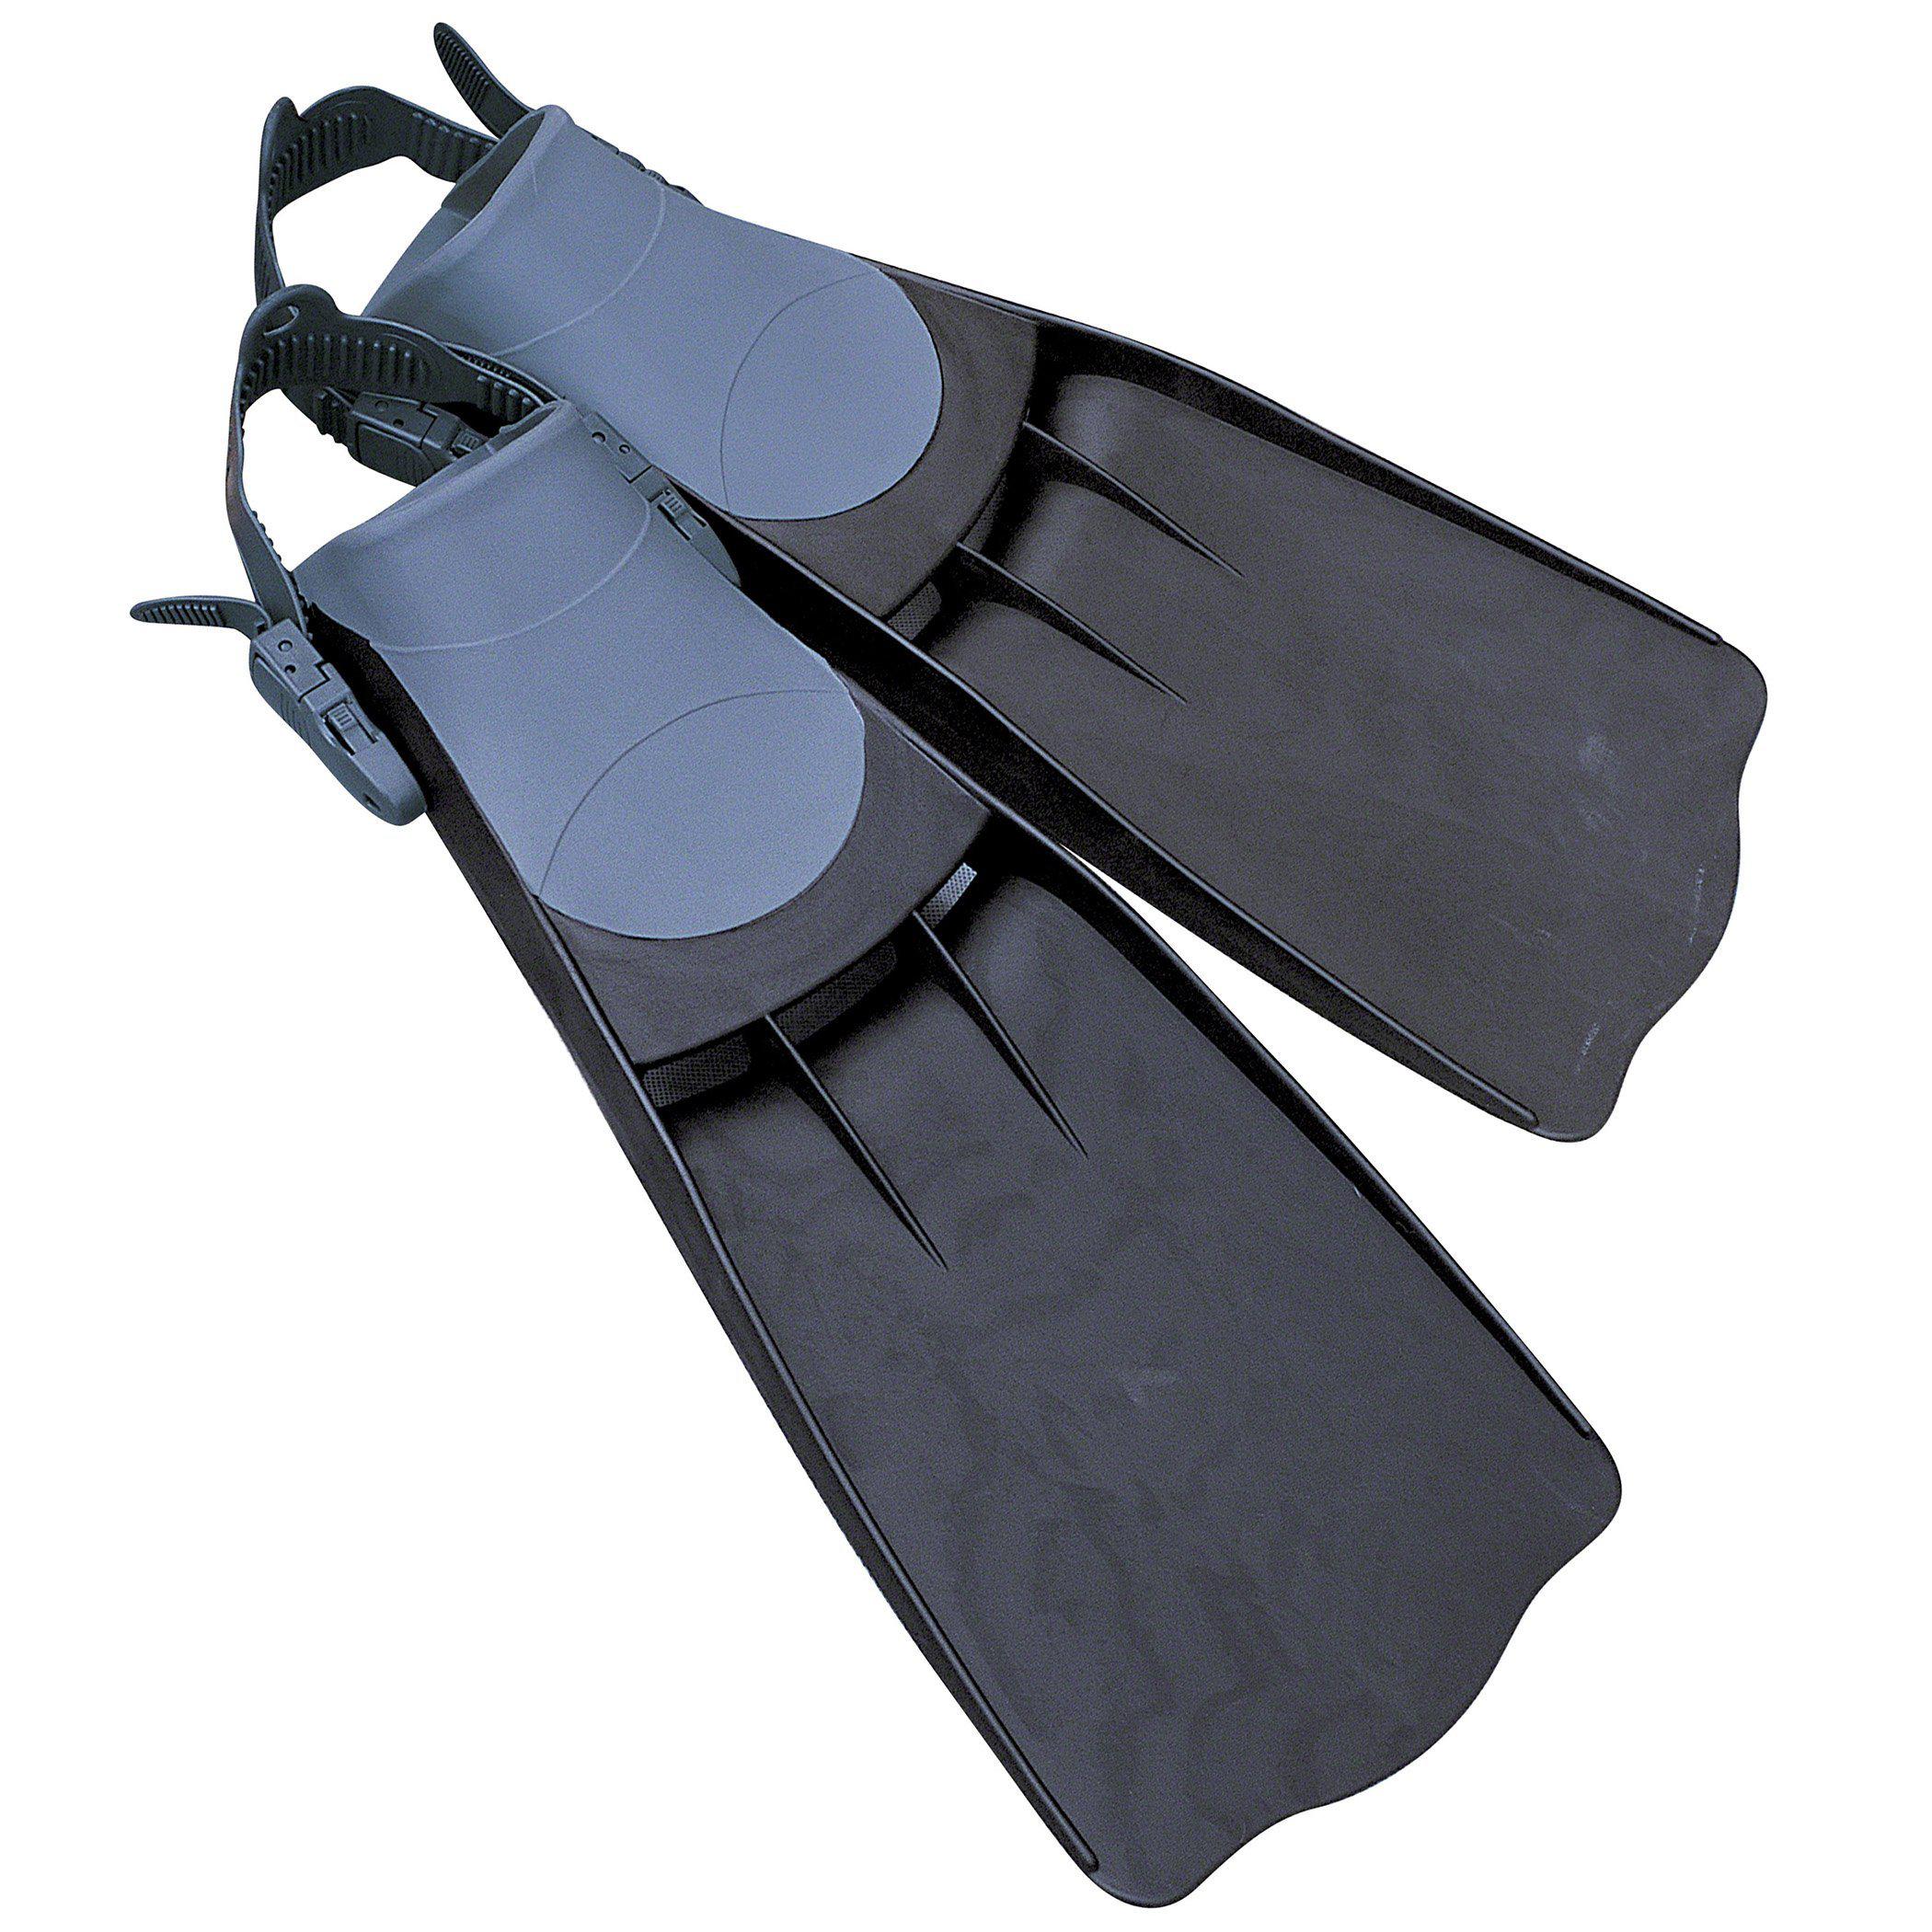 Float Tube Accessories